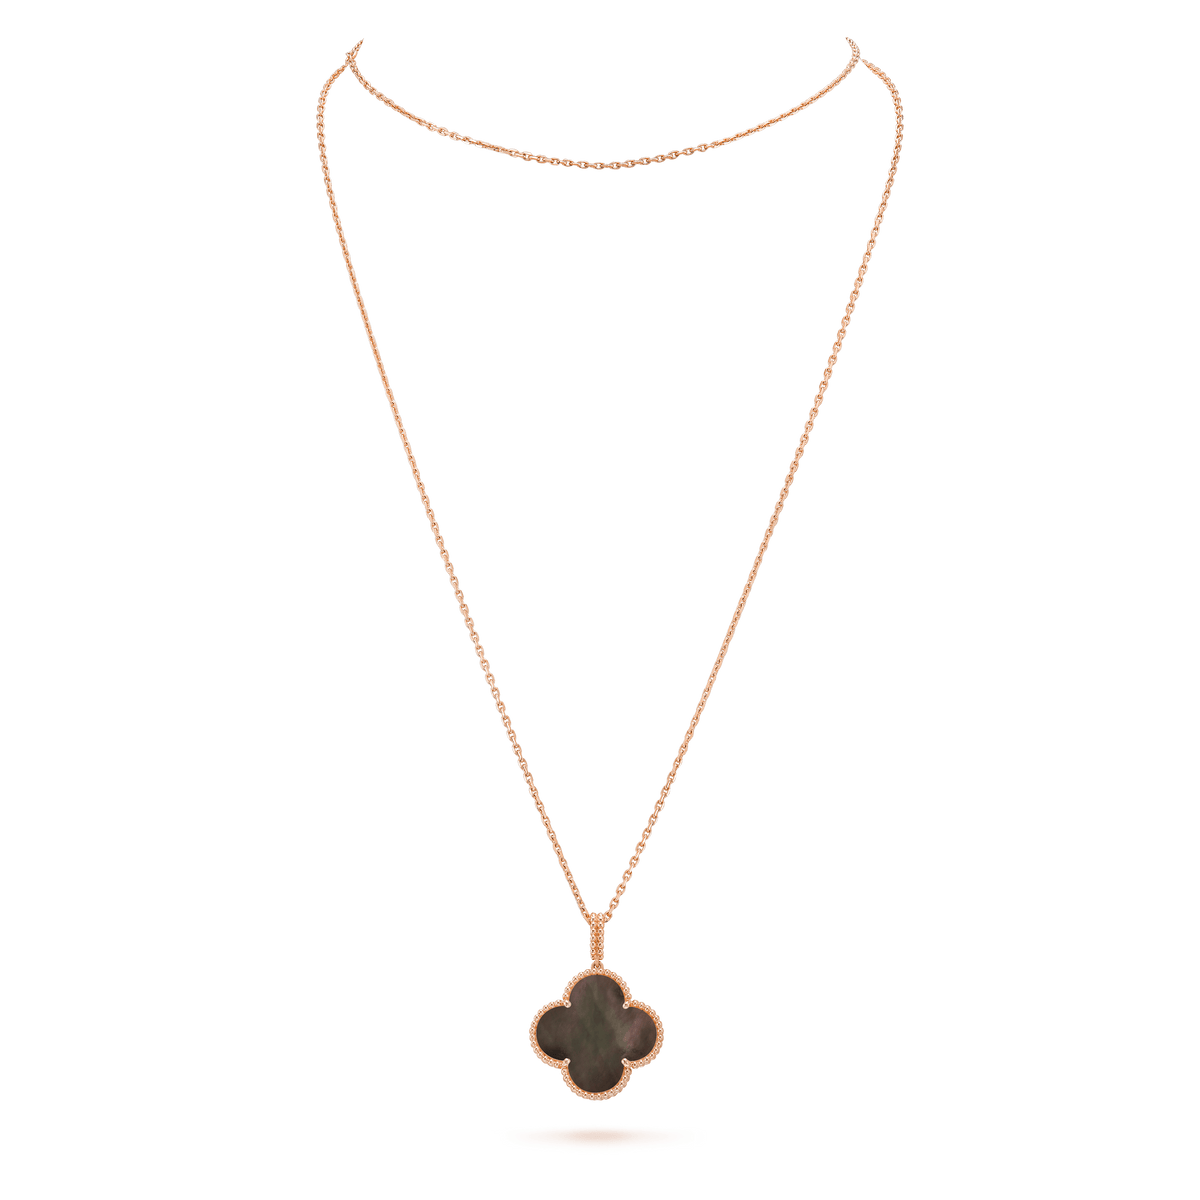 Long Magic Alhambra pendant : please post your thoughts